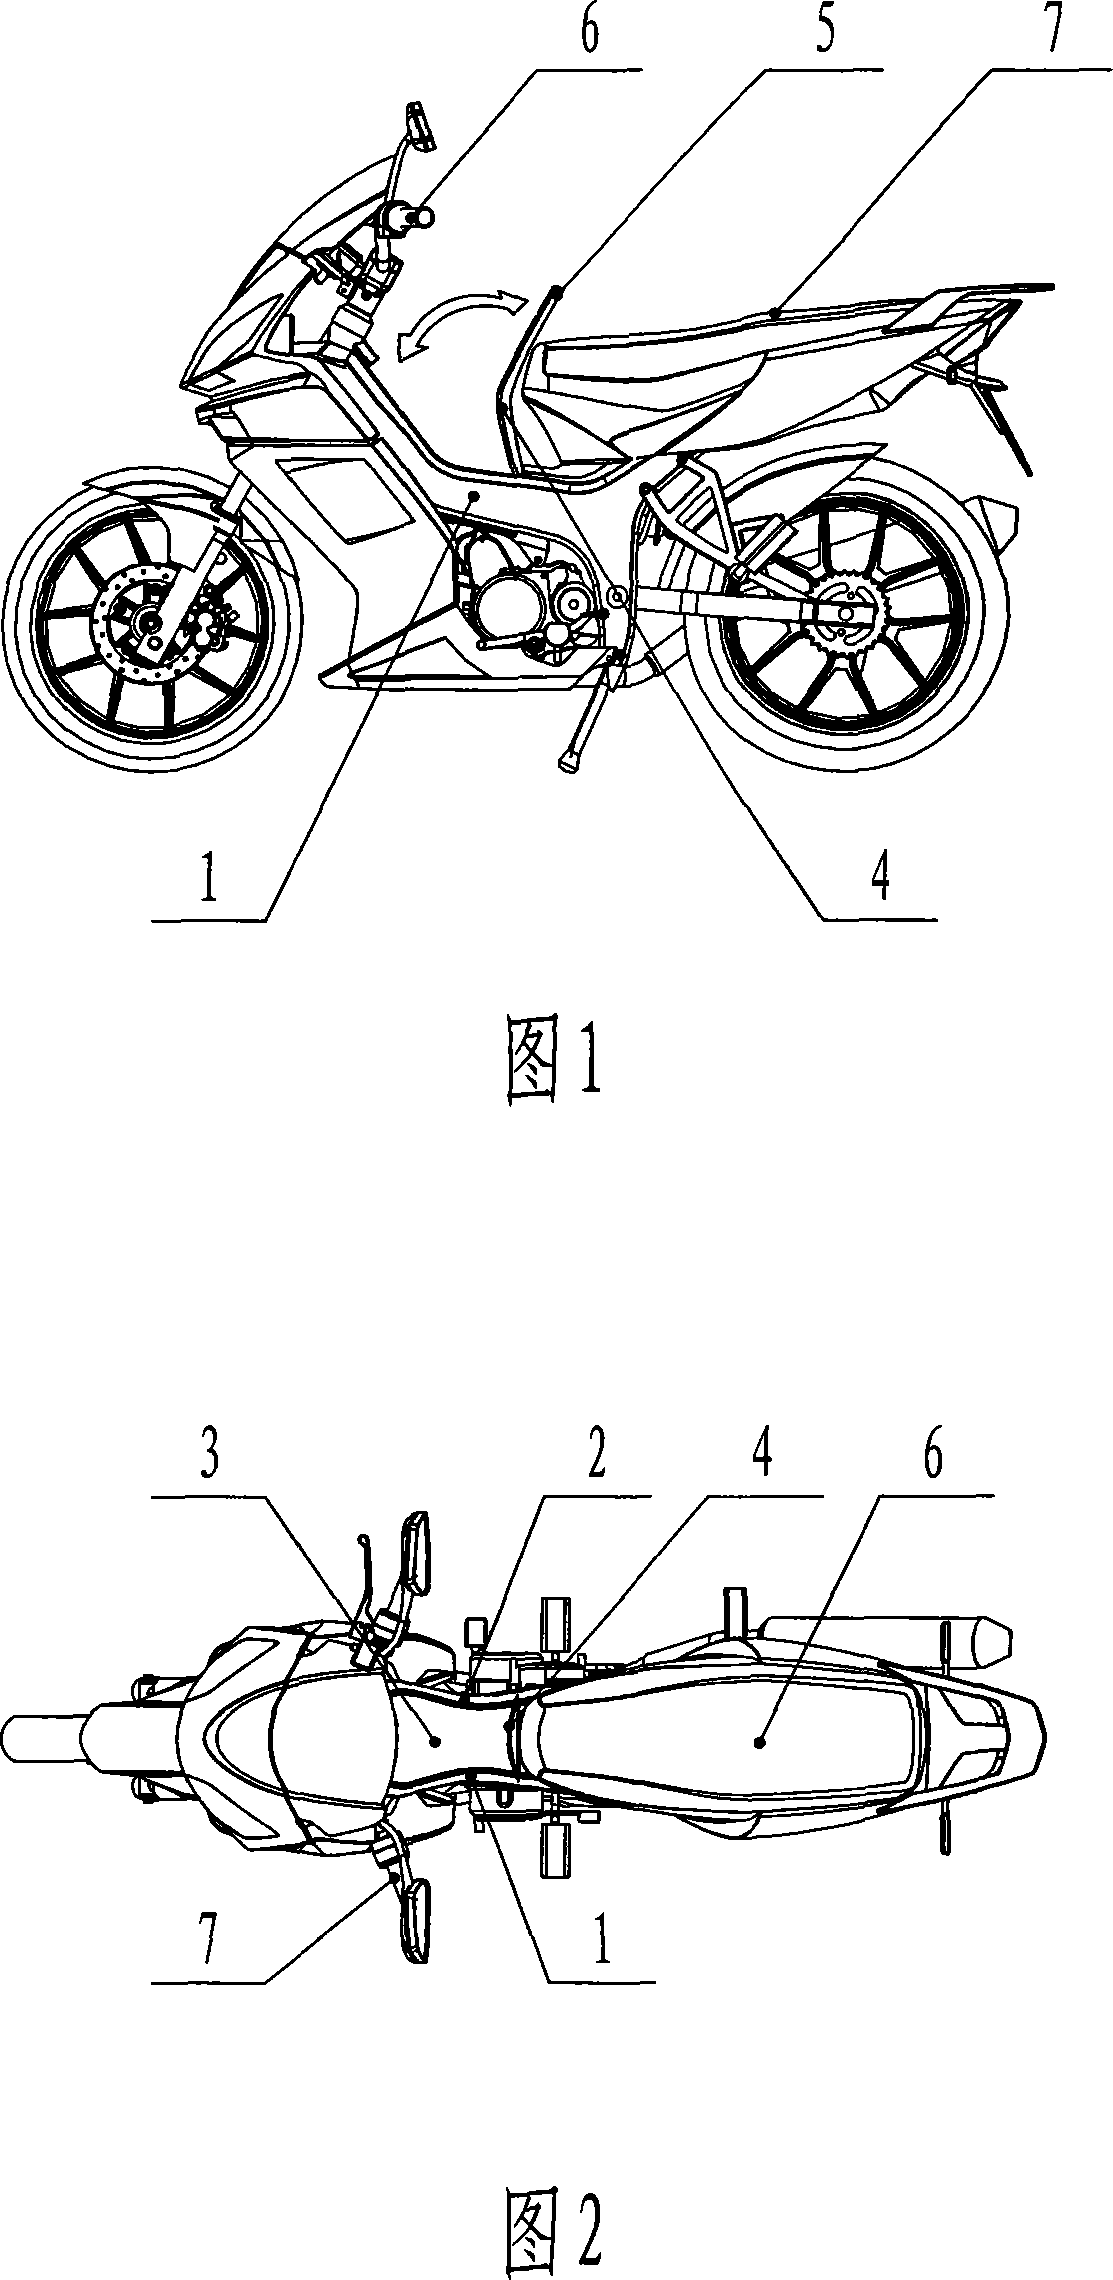 Storing box for bent frame motorcycle